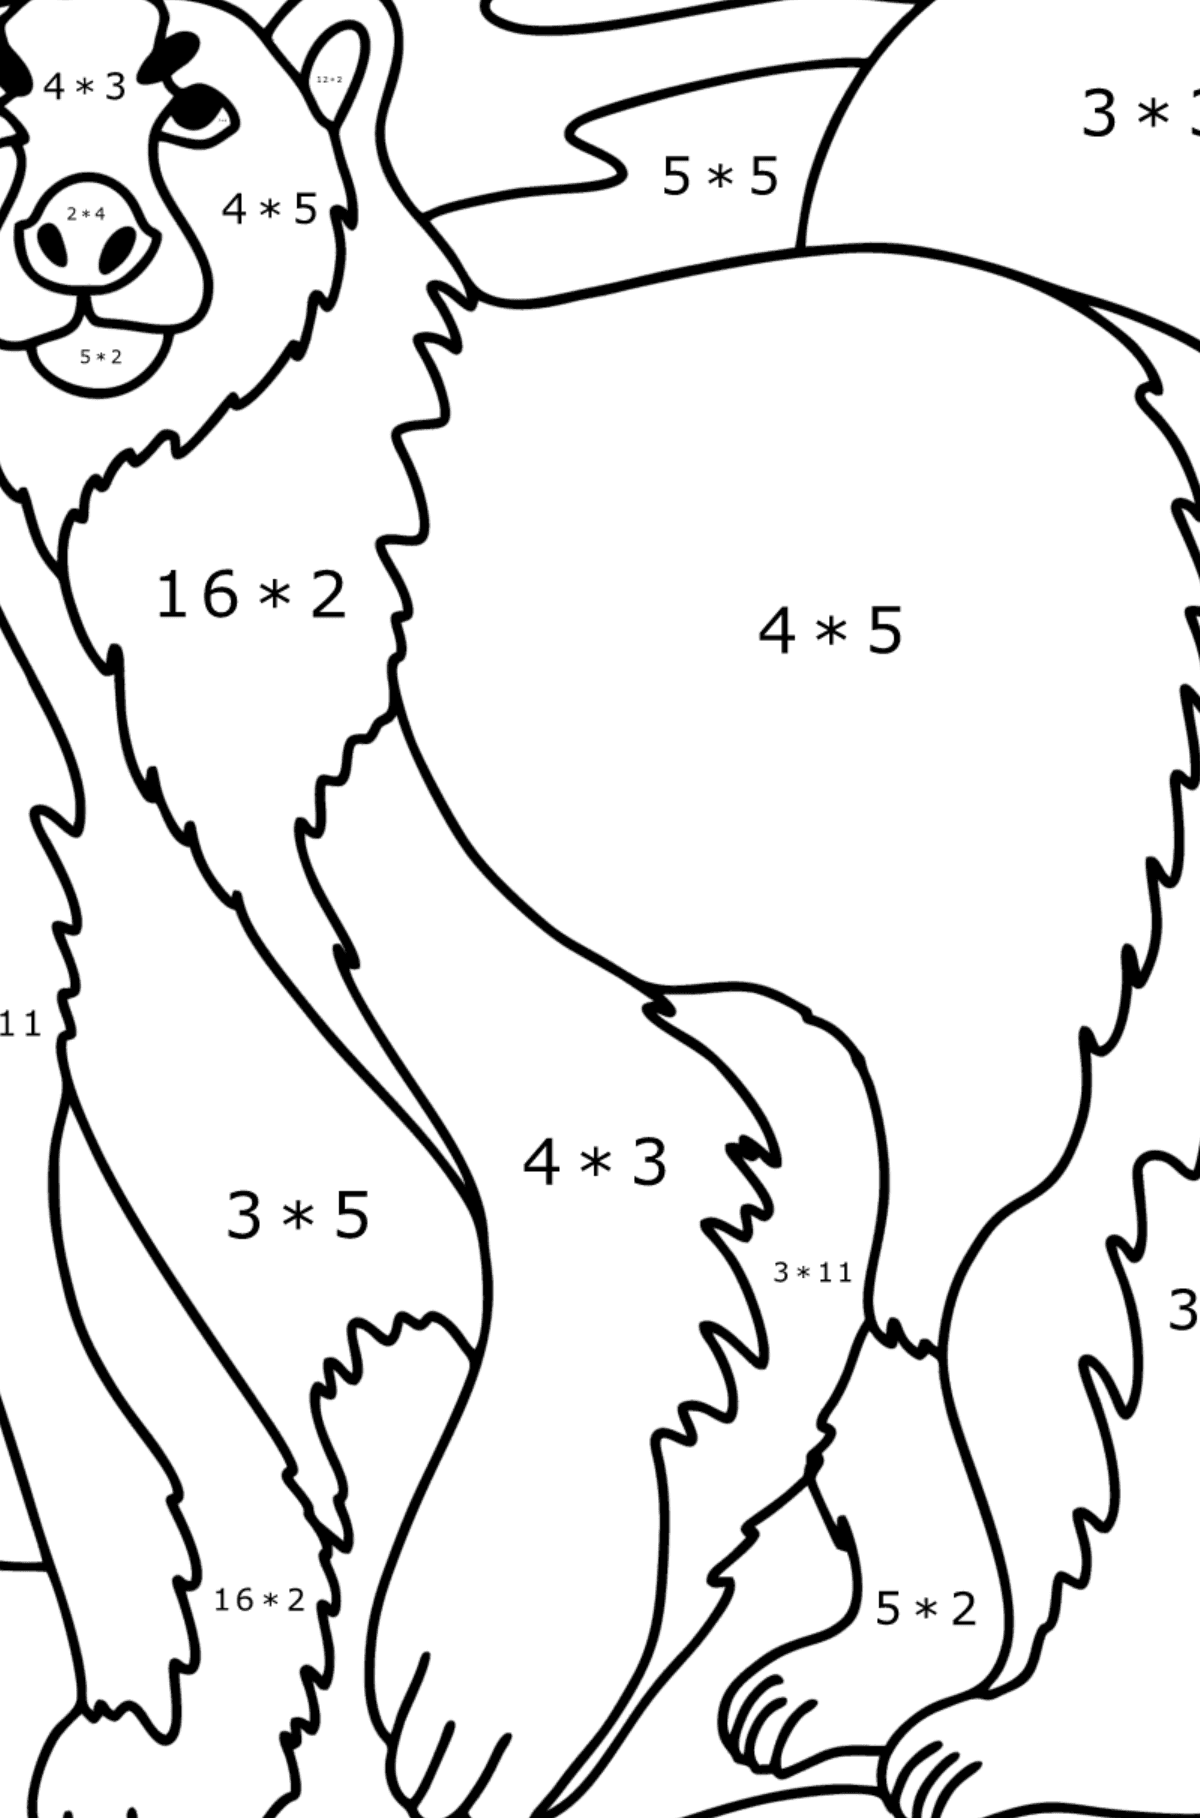 Polar bear coloring page - Math Coloring - Multiplication for Kids